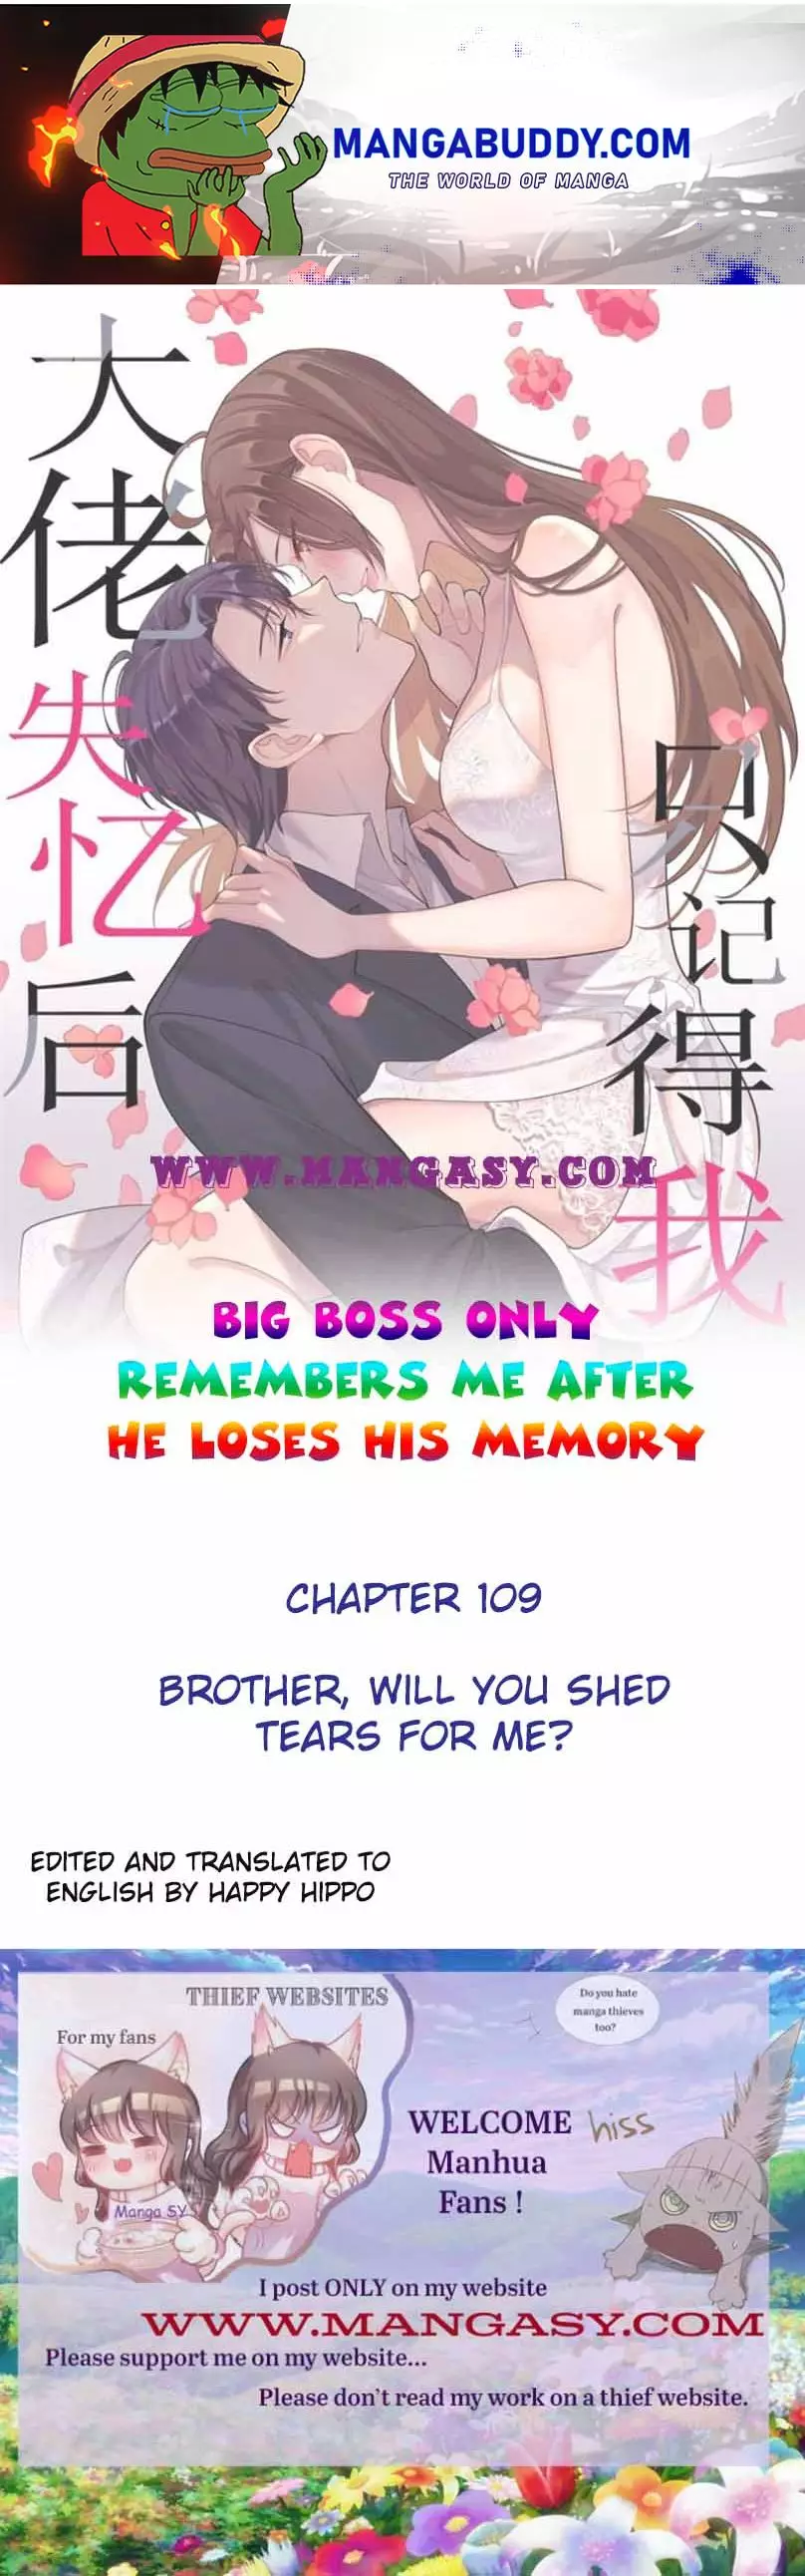 Big Boss Only Remembers Me After He Lost His Memory - 109 page 1-d2b72415